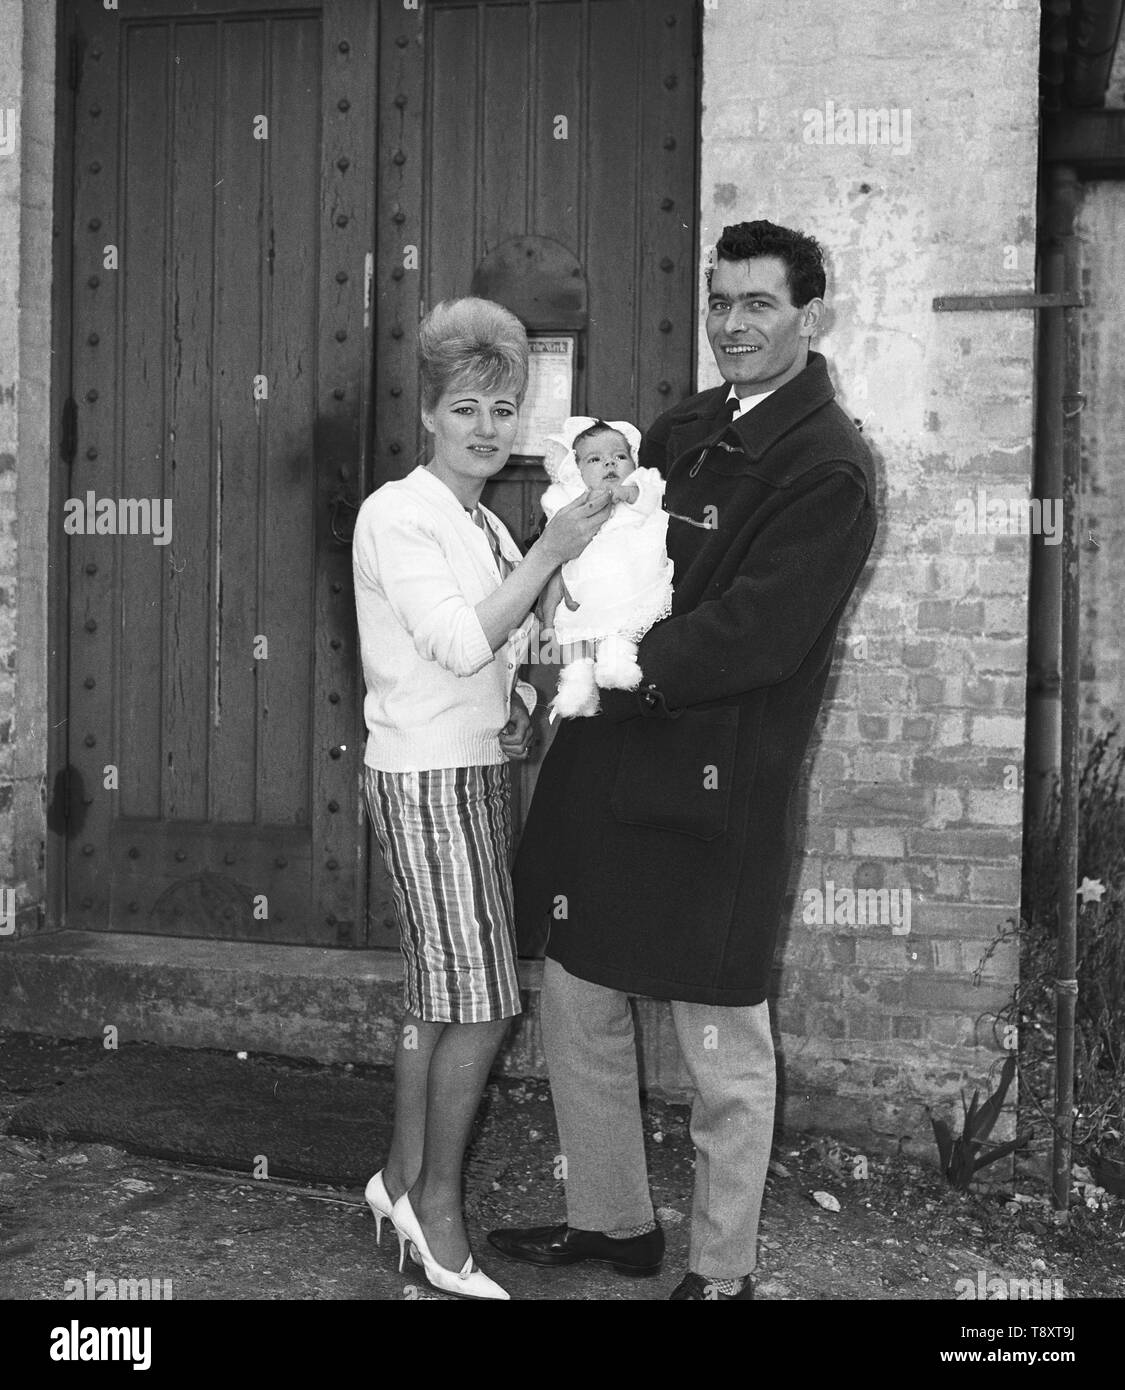 A Baby Christening in the UK c1962  Mum and dad with baby  Photo by Tony Henshaw Stock Photo